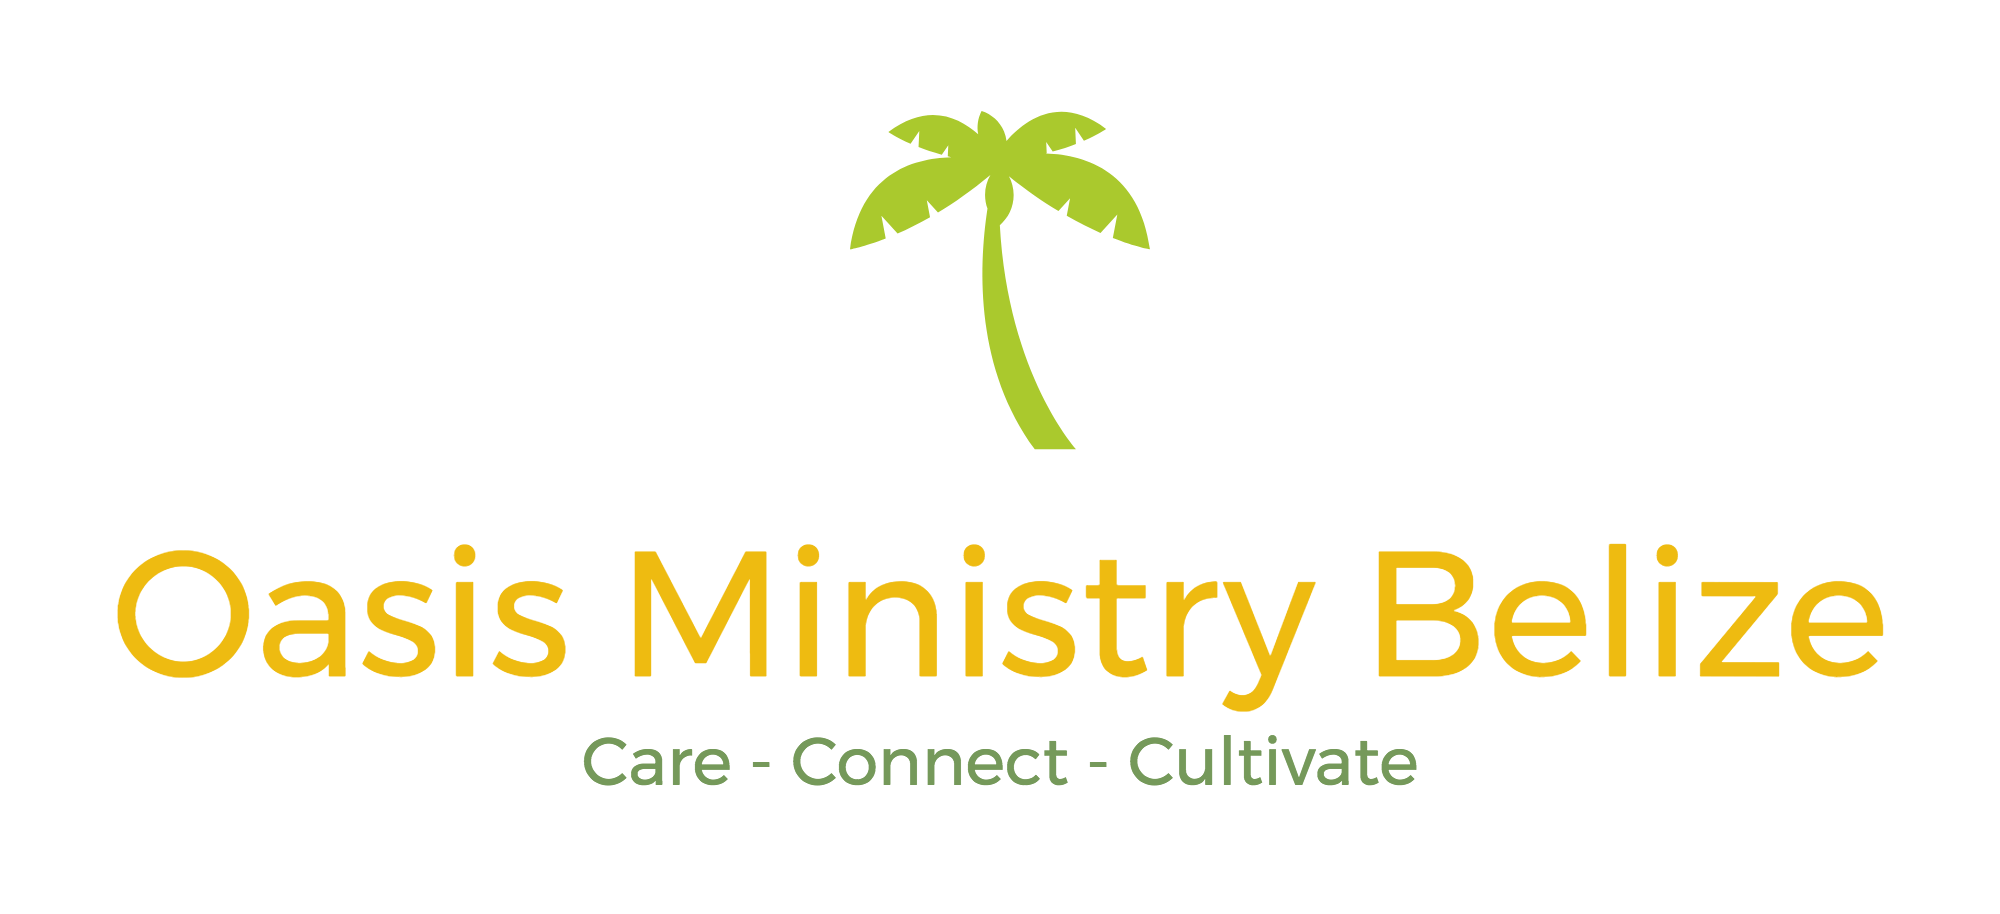 Oasis Ministry logo